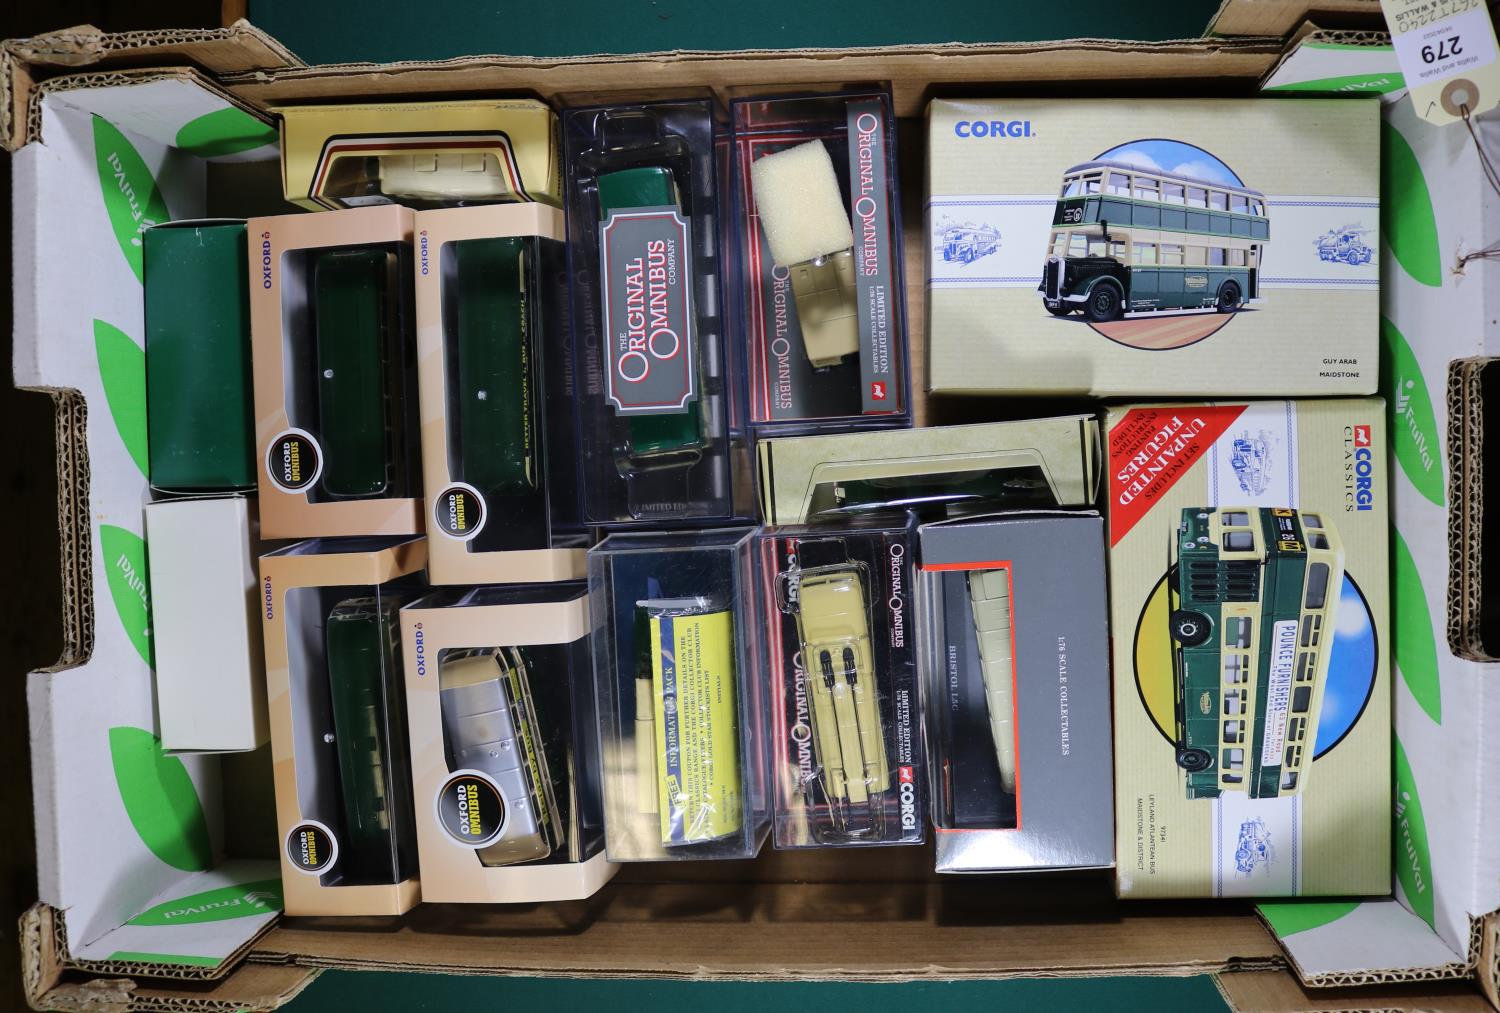 23x Maidstone and District themed EFE, OOC, Oxford Diecast, etc model buses and coaches. EFE Gift